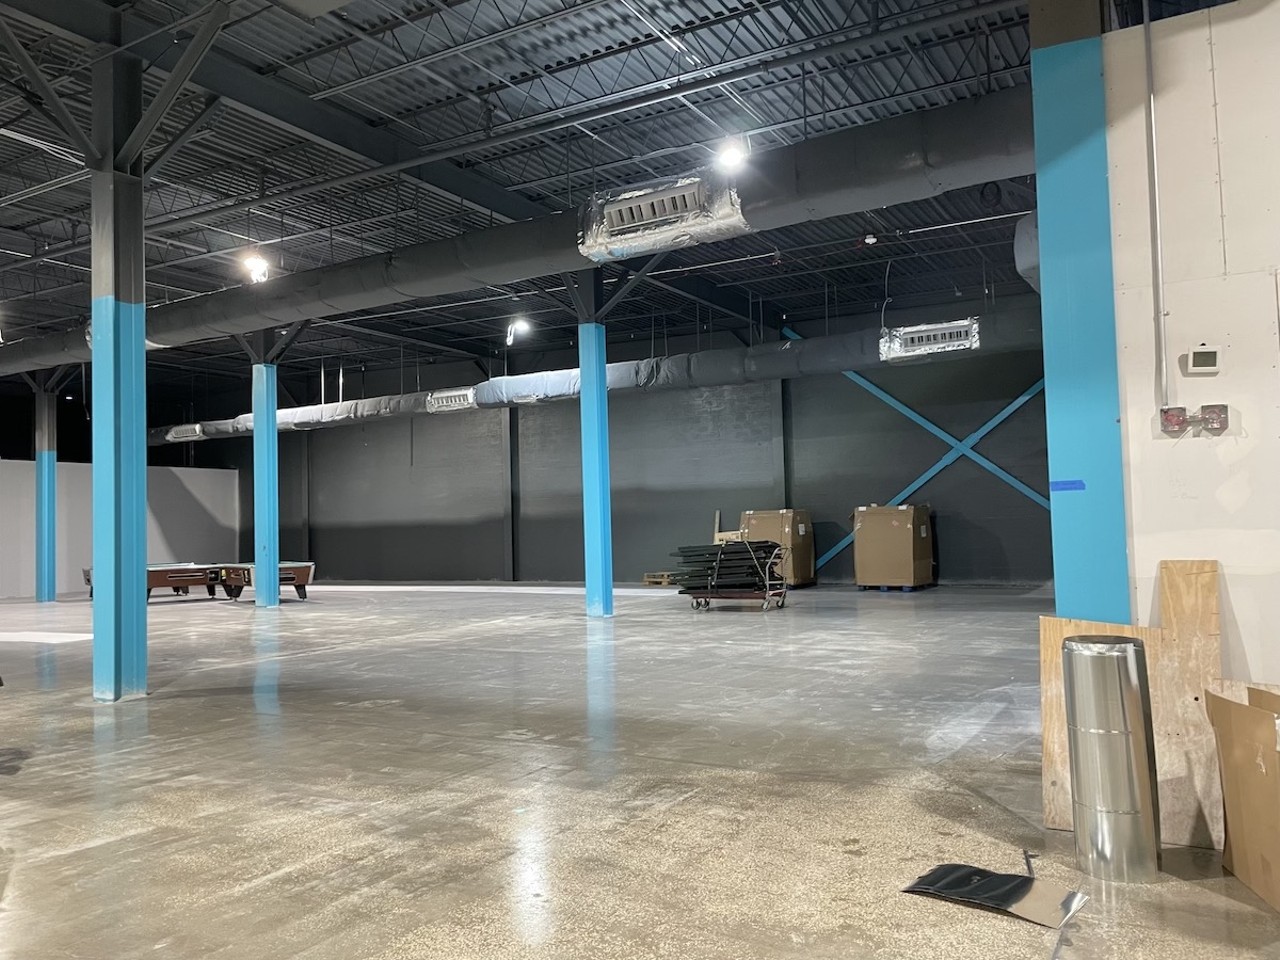 Photos: A look at progress on Tampa’s Elev8 Fun indoor amusement park opening in Citrus Park this summer